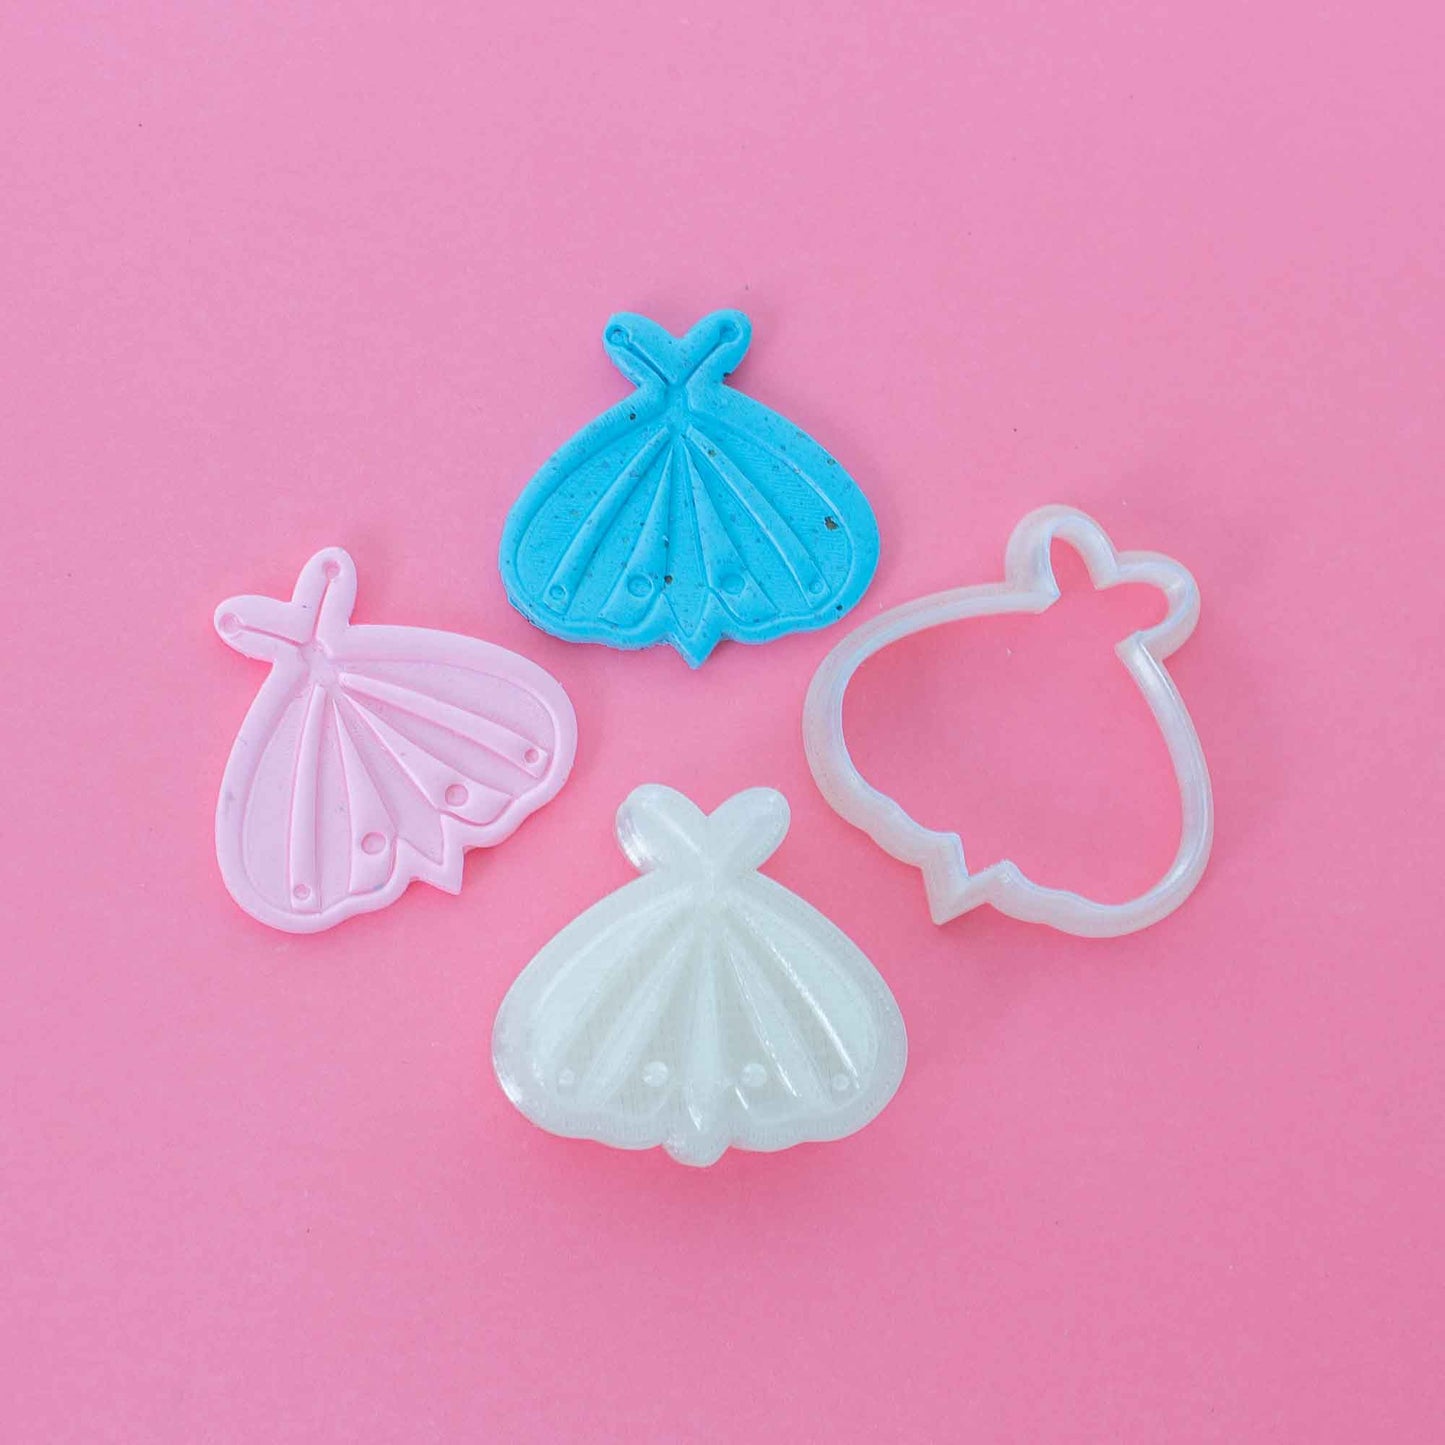 Butterfly stamp and cutter for polymer clay next to 2 colorful clay shapes on a pink background